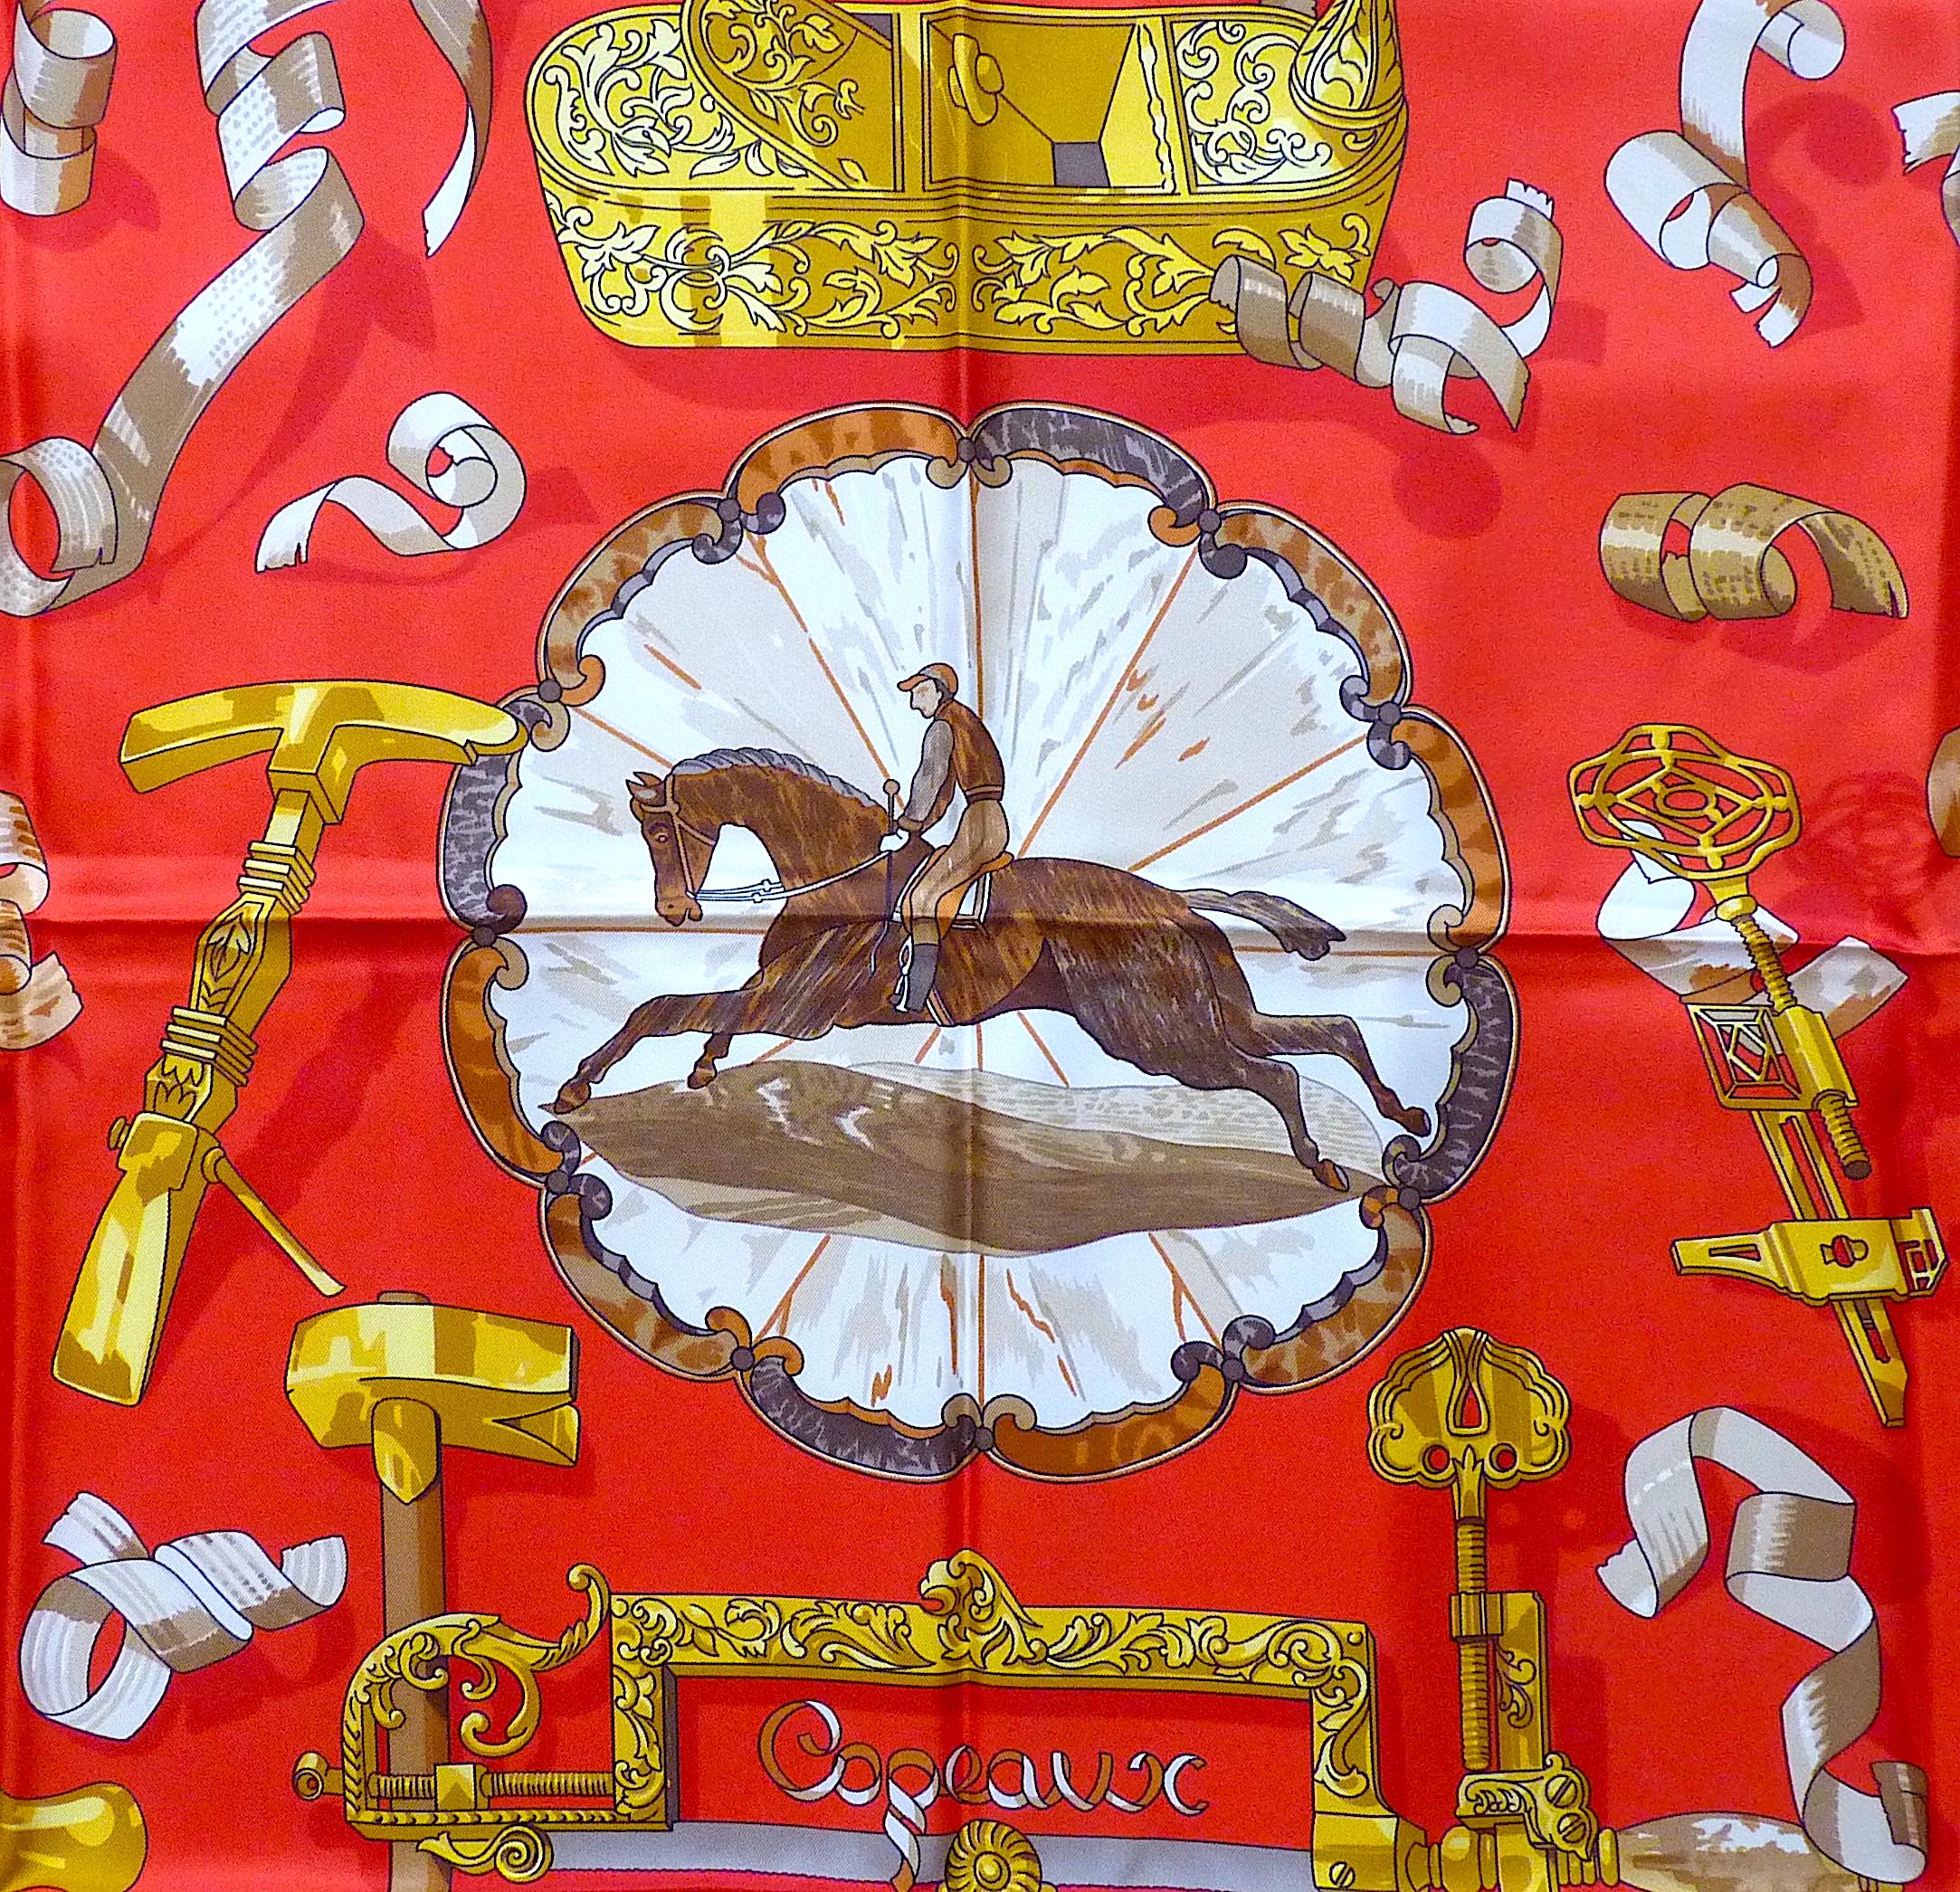 HERMES Scarf Copeaux by Caty Latham,  Never Worn, only one single edition in 1998

Red Background, Gold Pattern

CONDITION : Pristine Condition ! Never worn !

Care Tag attached, 100% Silk Twill, no box

Size : around 35